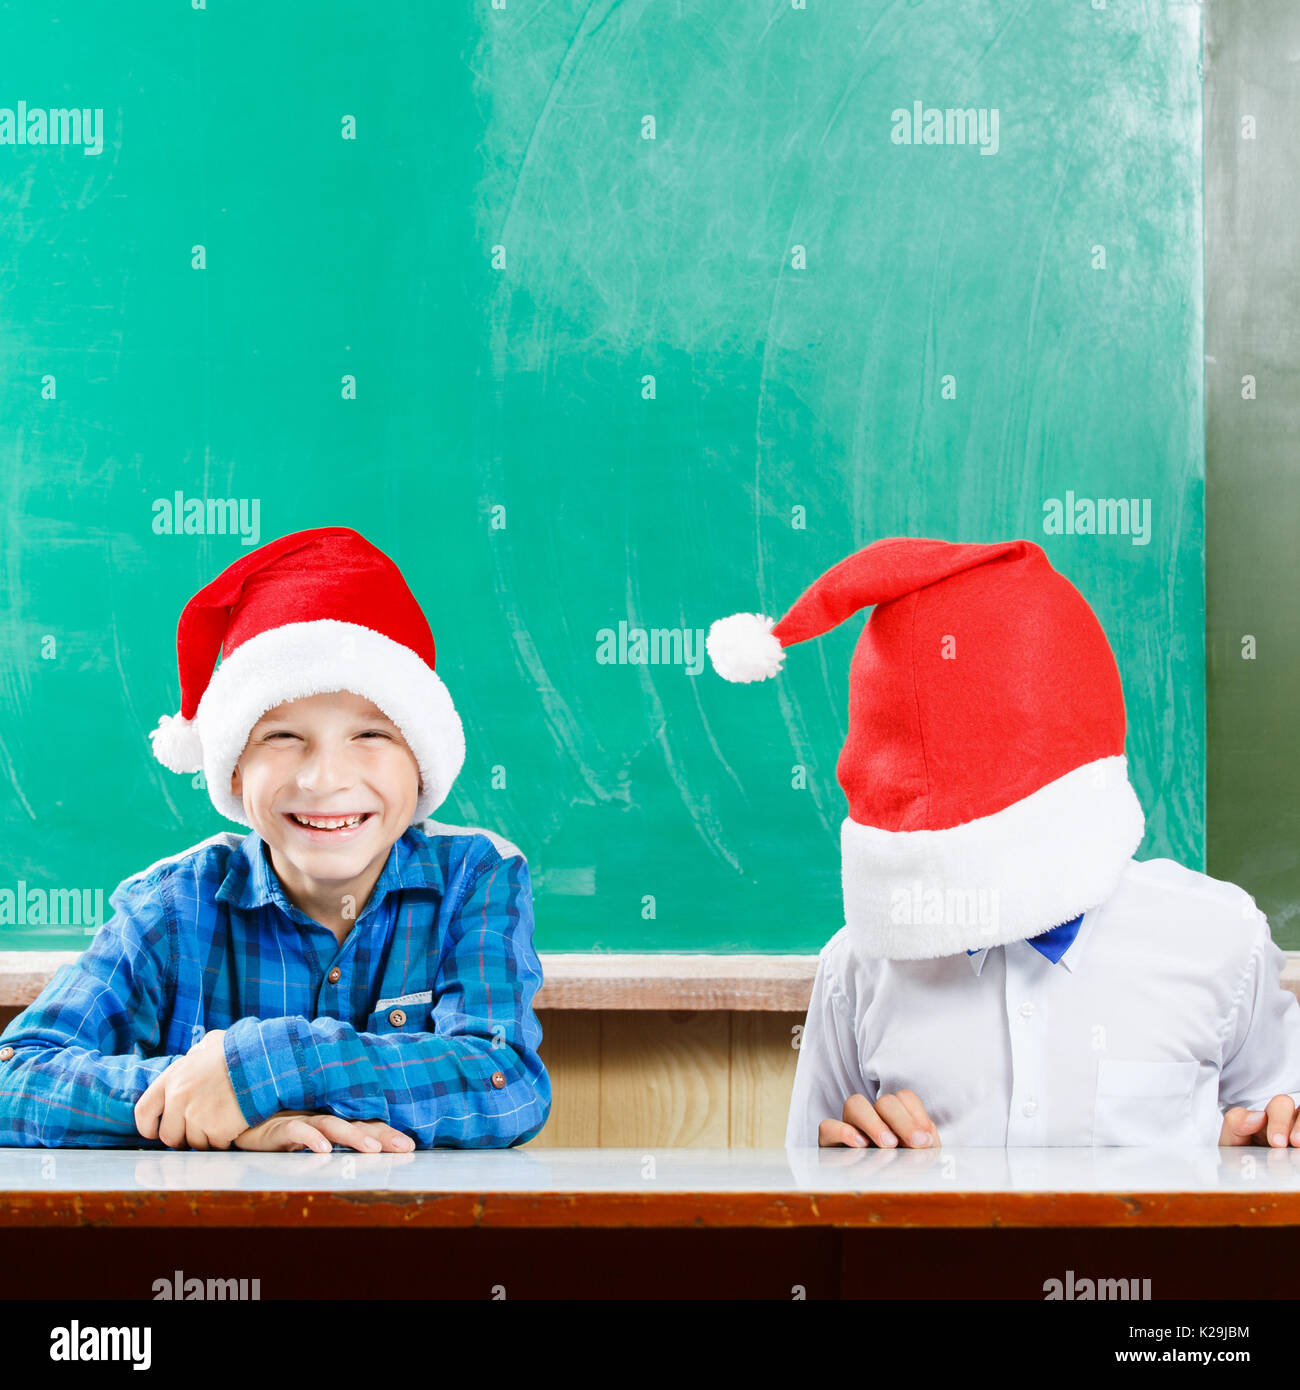 Two boys in santa hats have fun against school blackboard. Christmas concept background with copy space Stock Photo